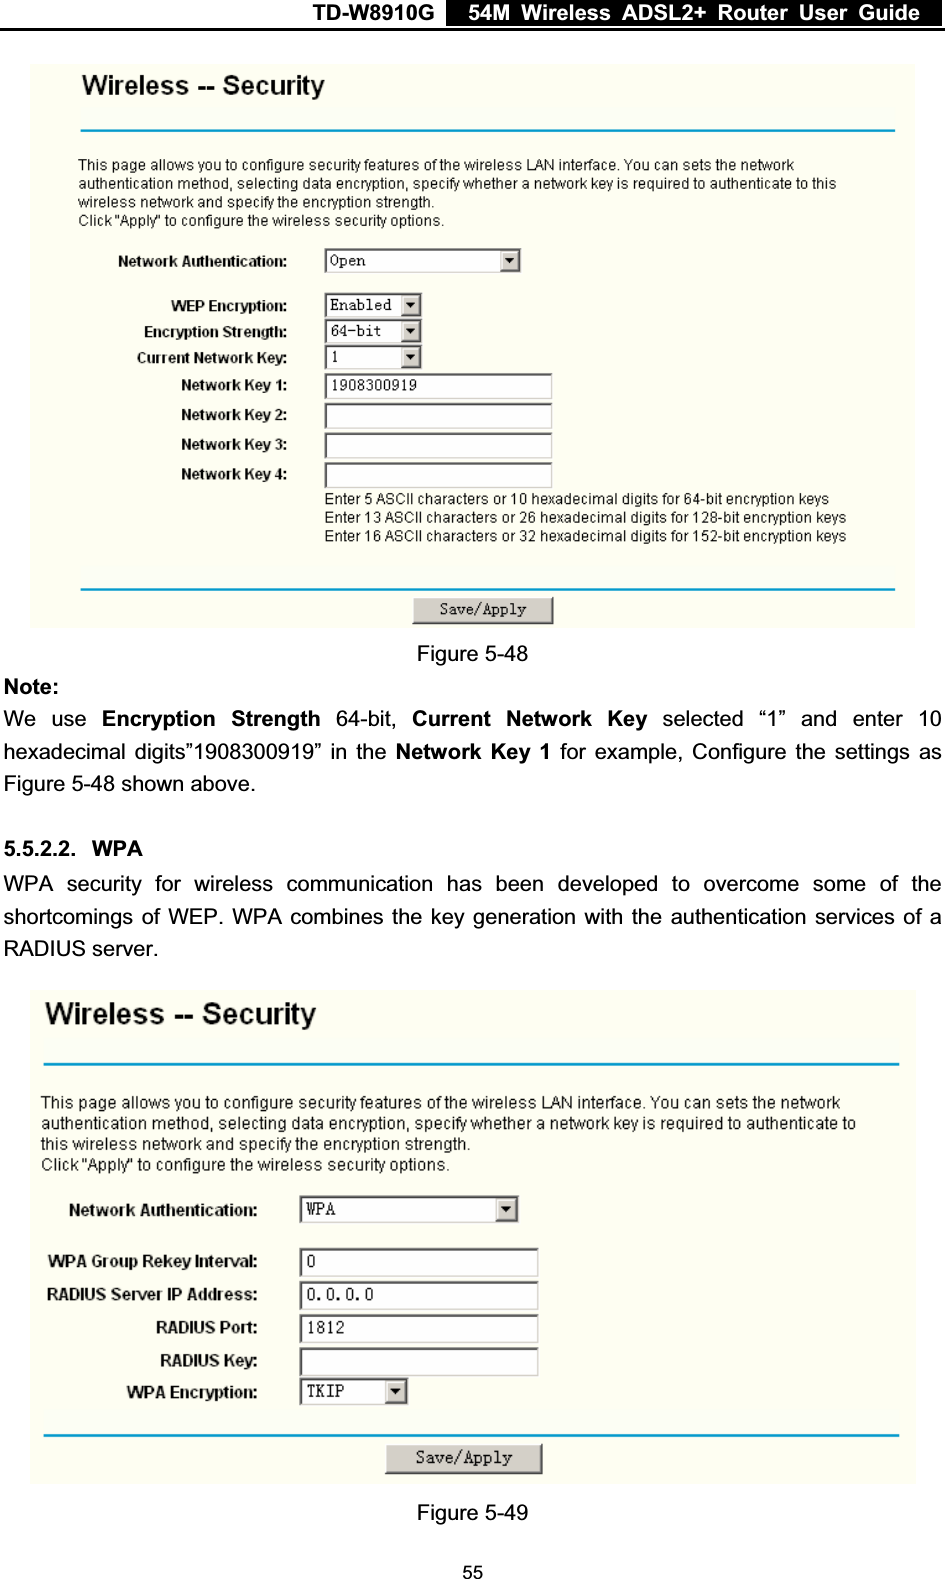 TD-W8910G    54M Wireless ADSL2+ Router User Guide  Figure 5-48 Note:We use Encryption Strength 64-bit, Current Network Key selected “1” and enter 10 hexadecimal digits”1908300919” in the Network Key 1 for example, Configure the settings as Figure 5-48 shown above. 5.5.2.2. WPAWPA security for wireless communication has been developed to overcome some of the shortcomings of WEP. WPA combines the key generation with the authentication services of a RADIUS server. Figure 5-49  55